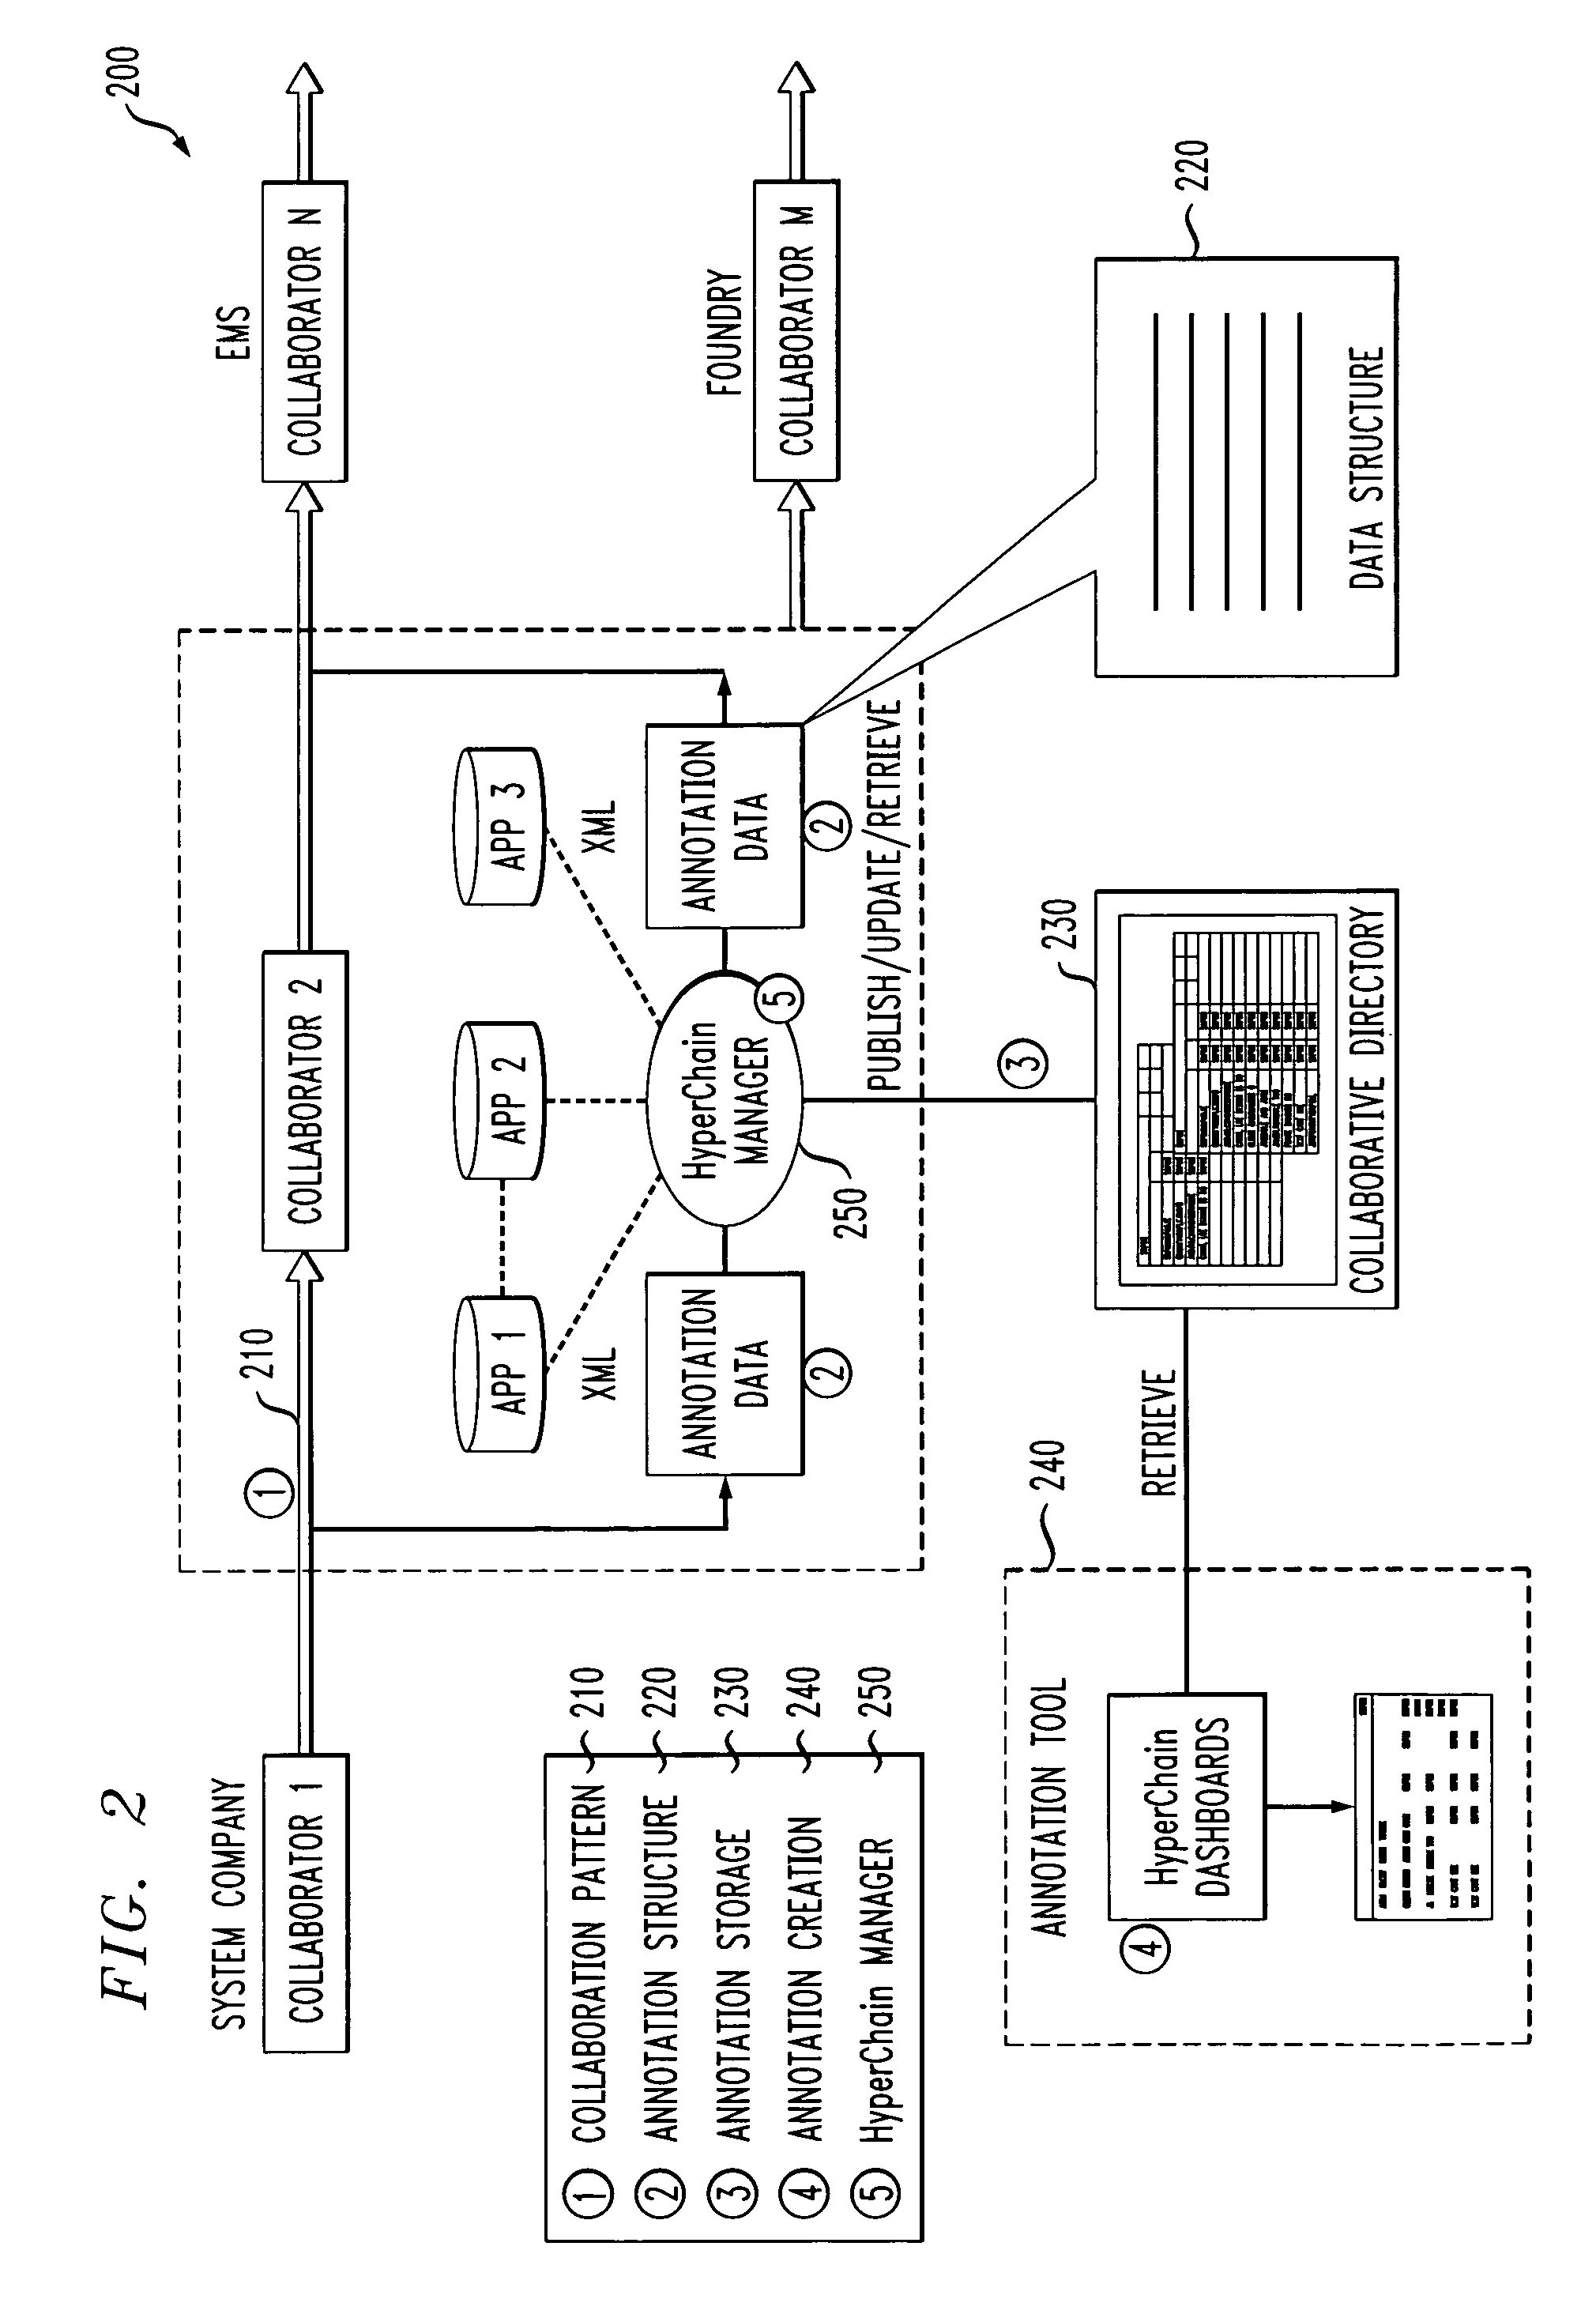 Methods and apparatus for information hyperchain management for on-demand business collaboration